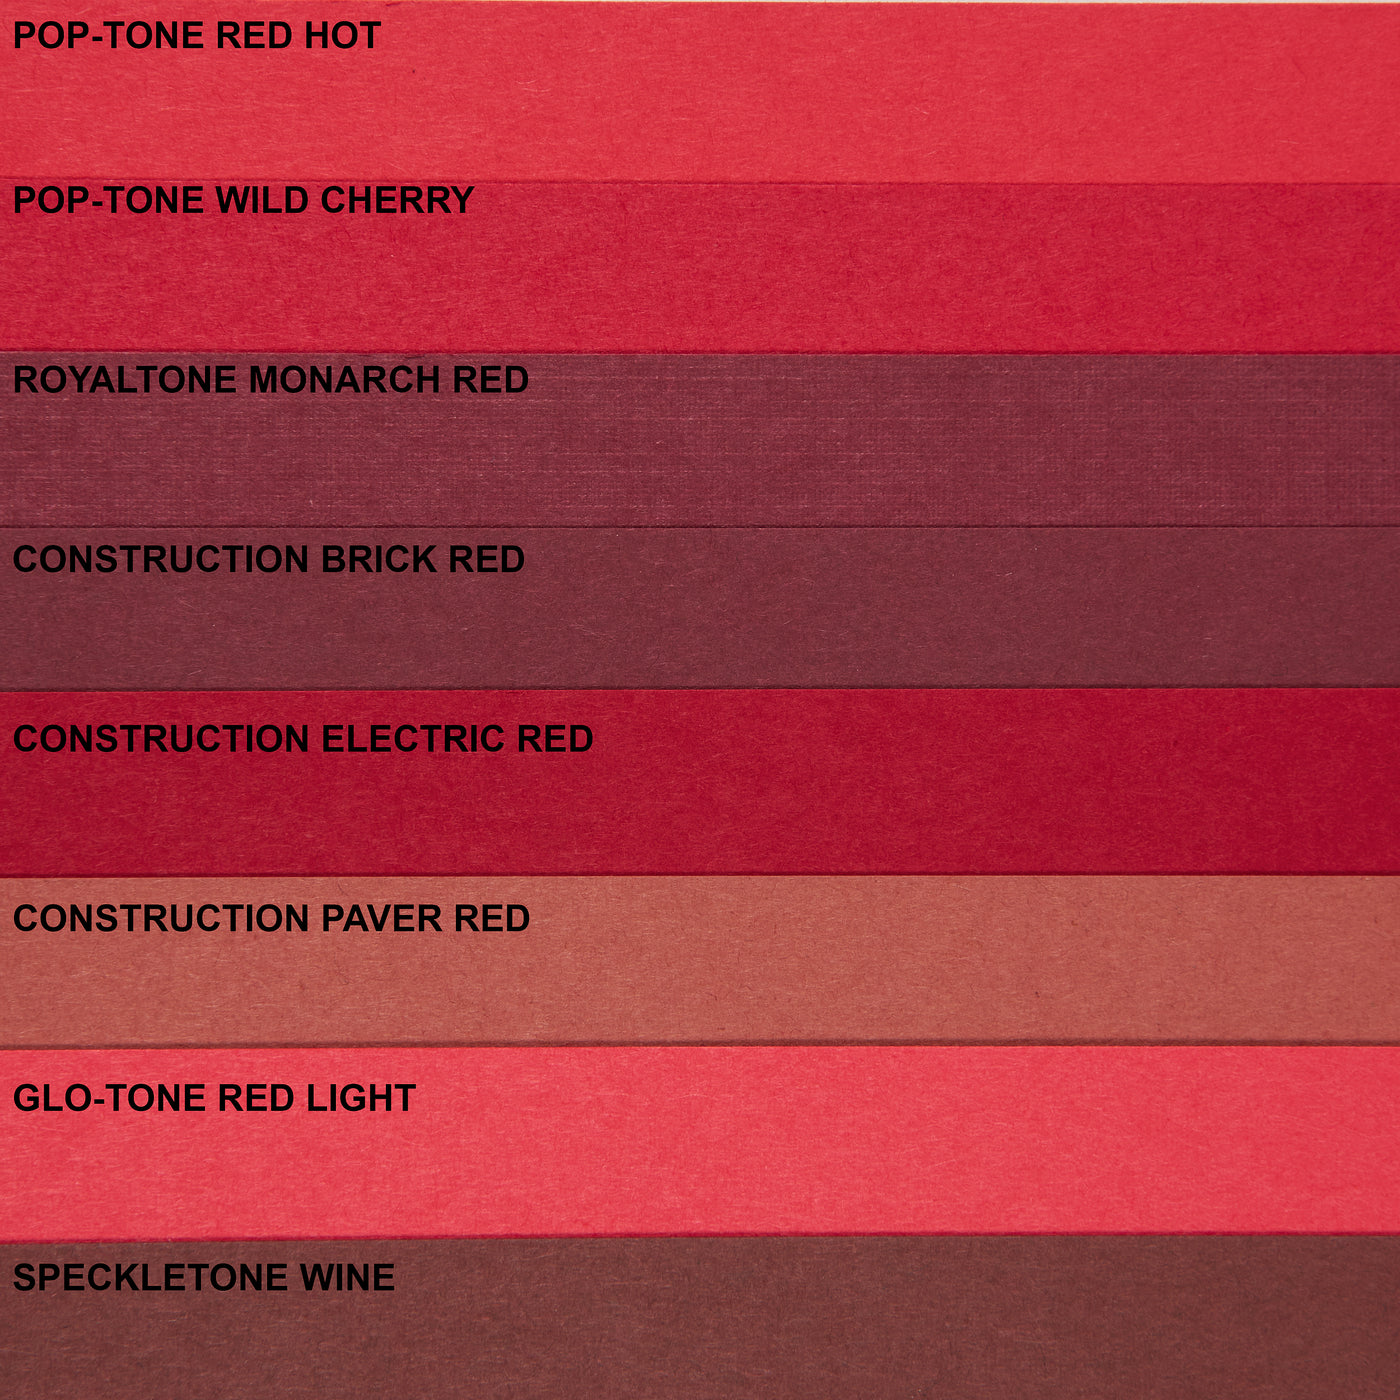 Electric Red Envelope (Construction)